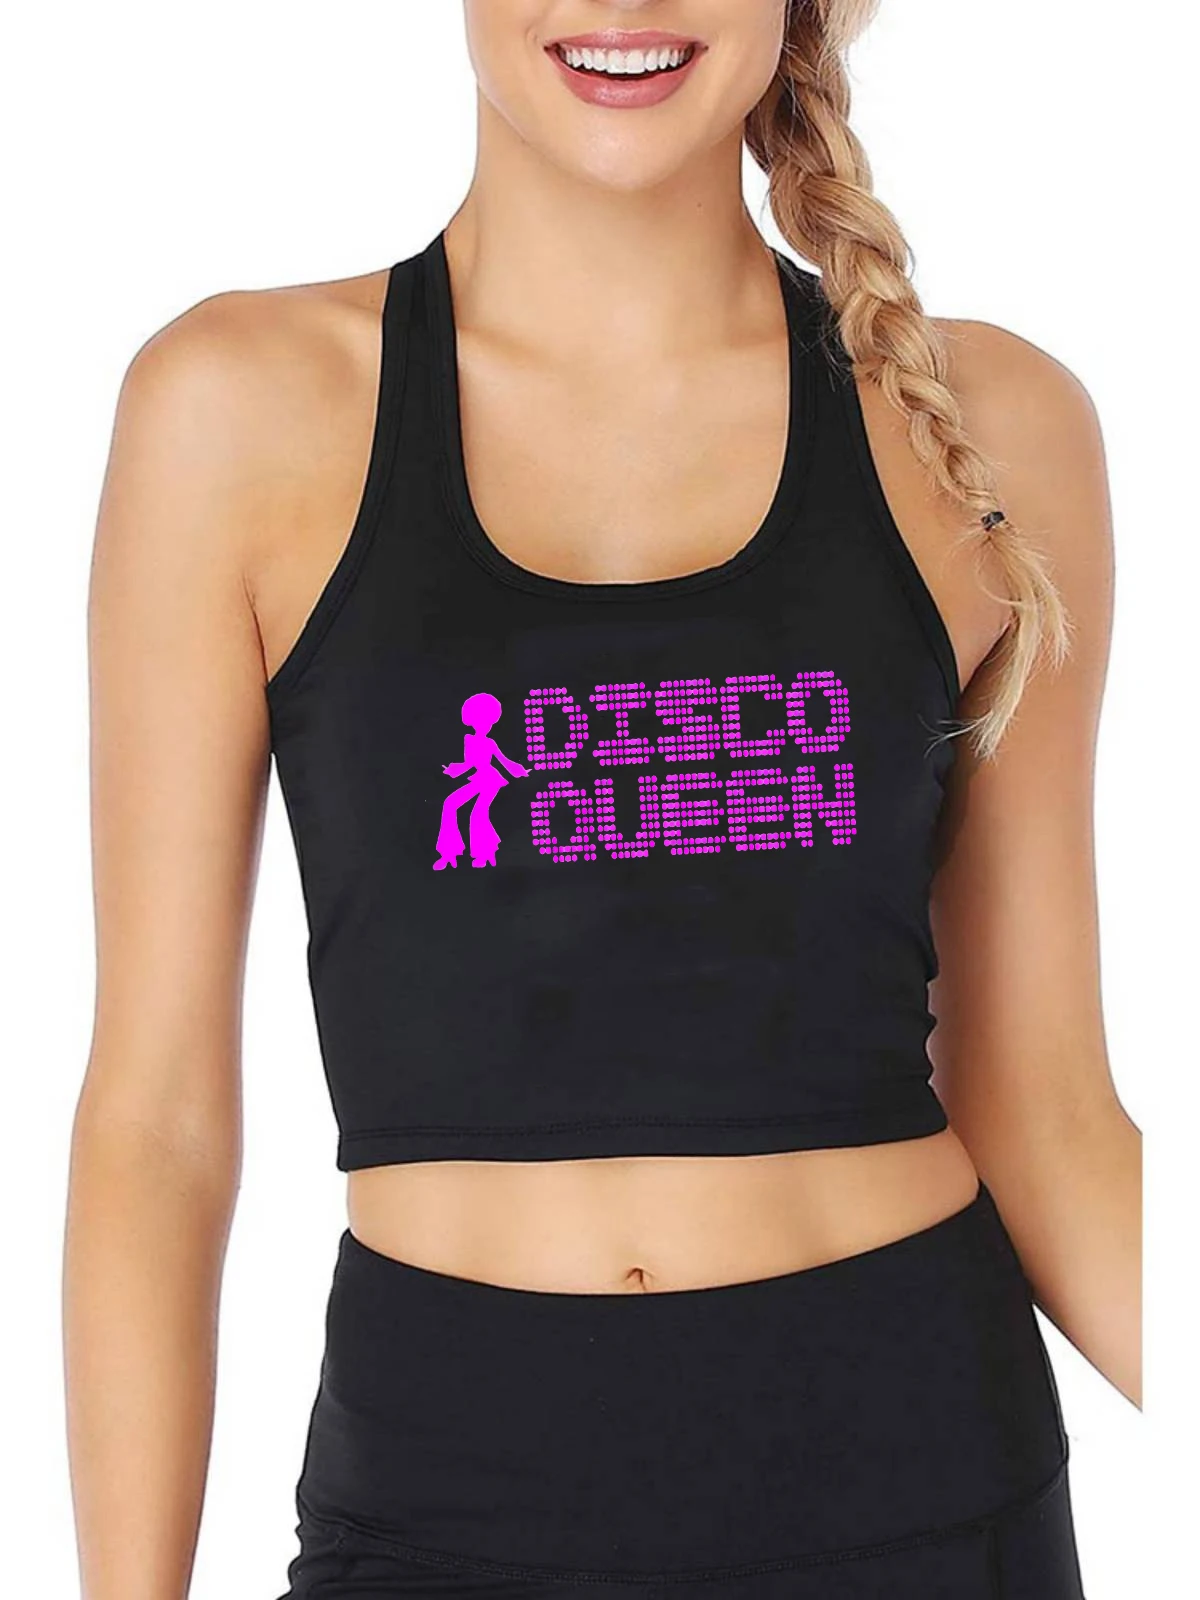 

Music Disco Queen Dancing Party Gift Idea Crop Top Dance Lovers Personality Customizable Tank Tops Gym Fitness Camisole